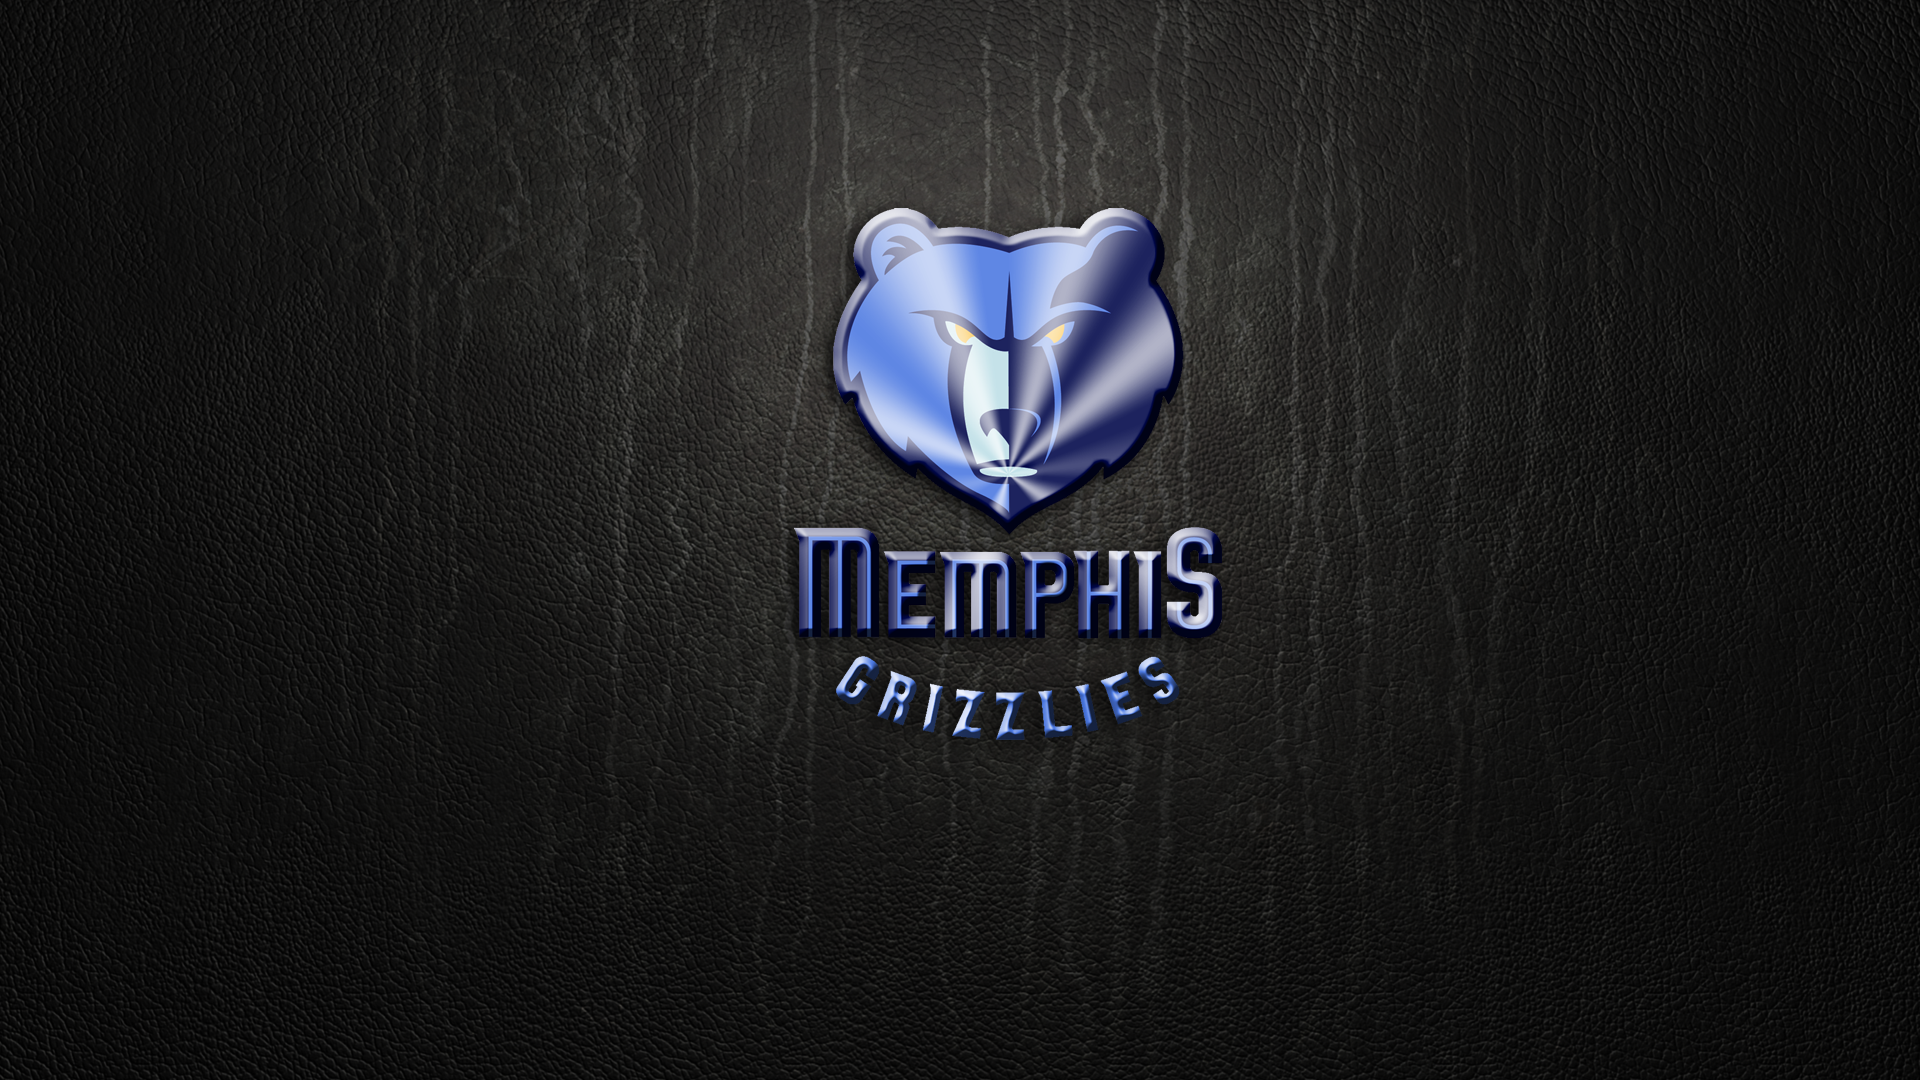 Old Grizzlies Logo Wallpapers